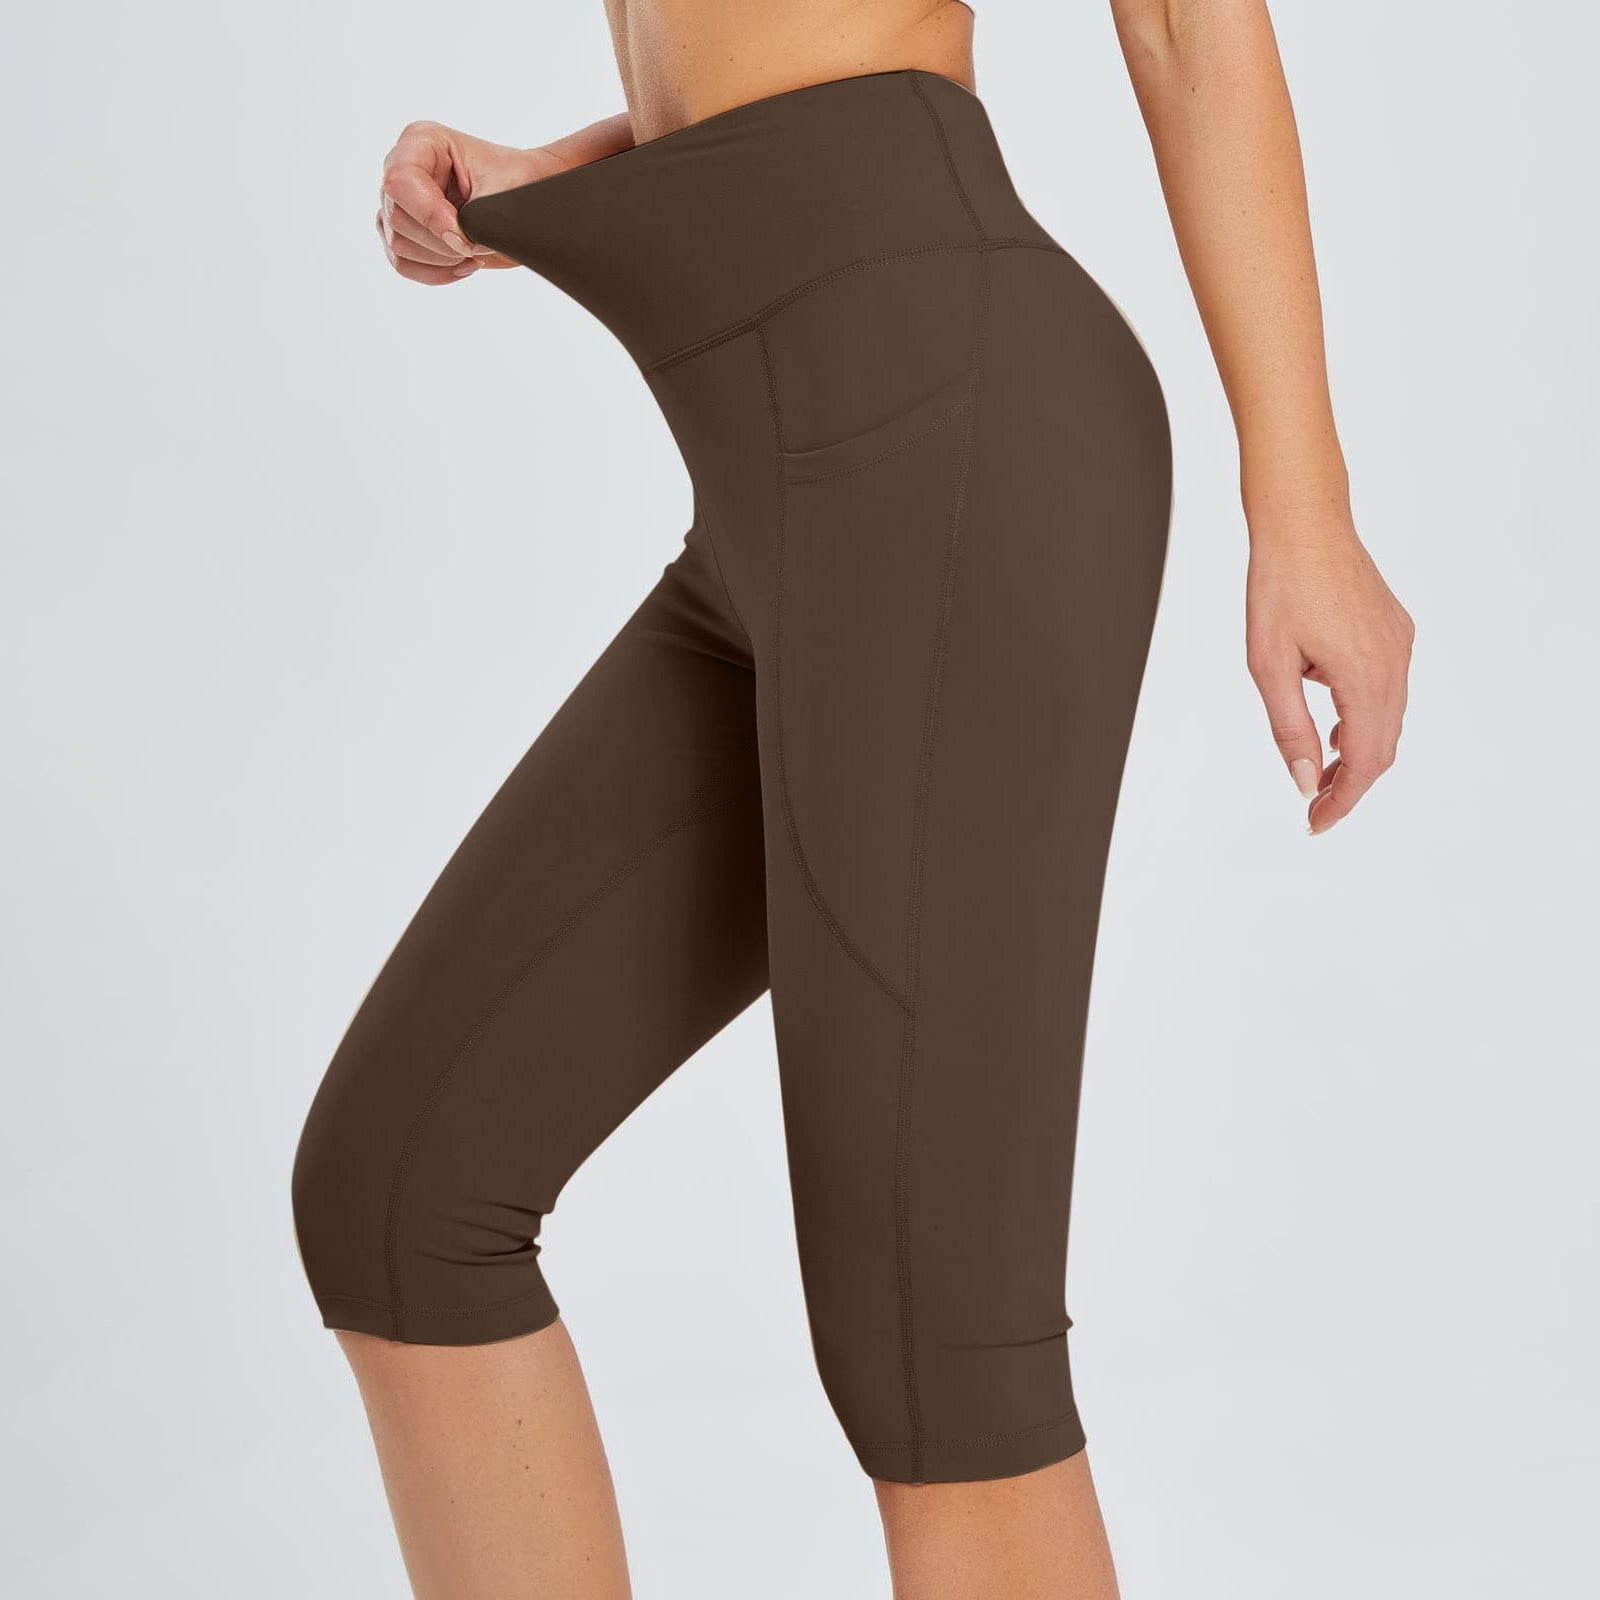 Leggings Wholesale Price In Tirupur India | International Society of  Precision Agriculture